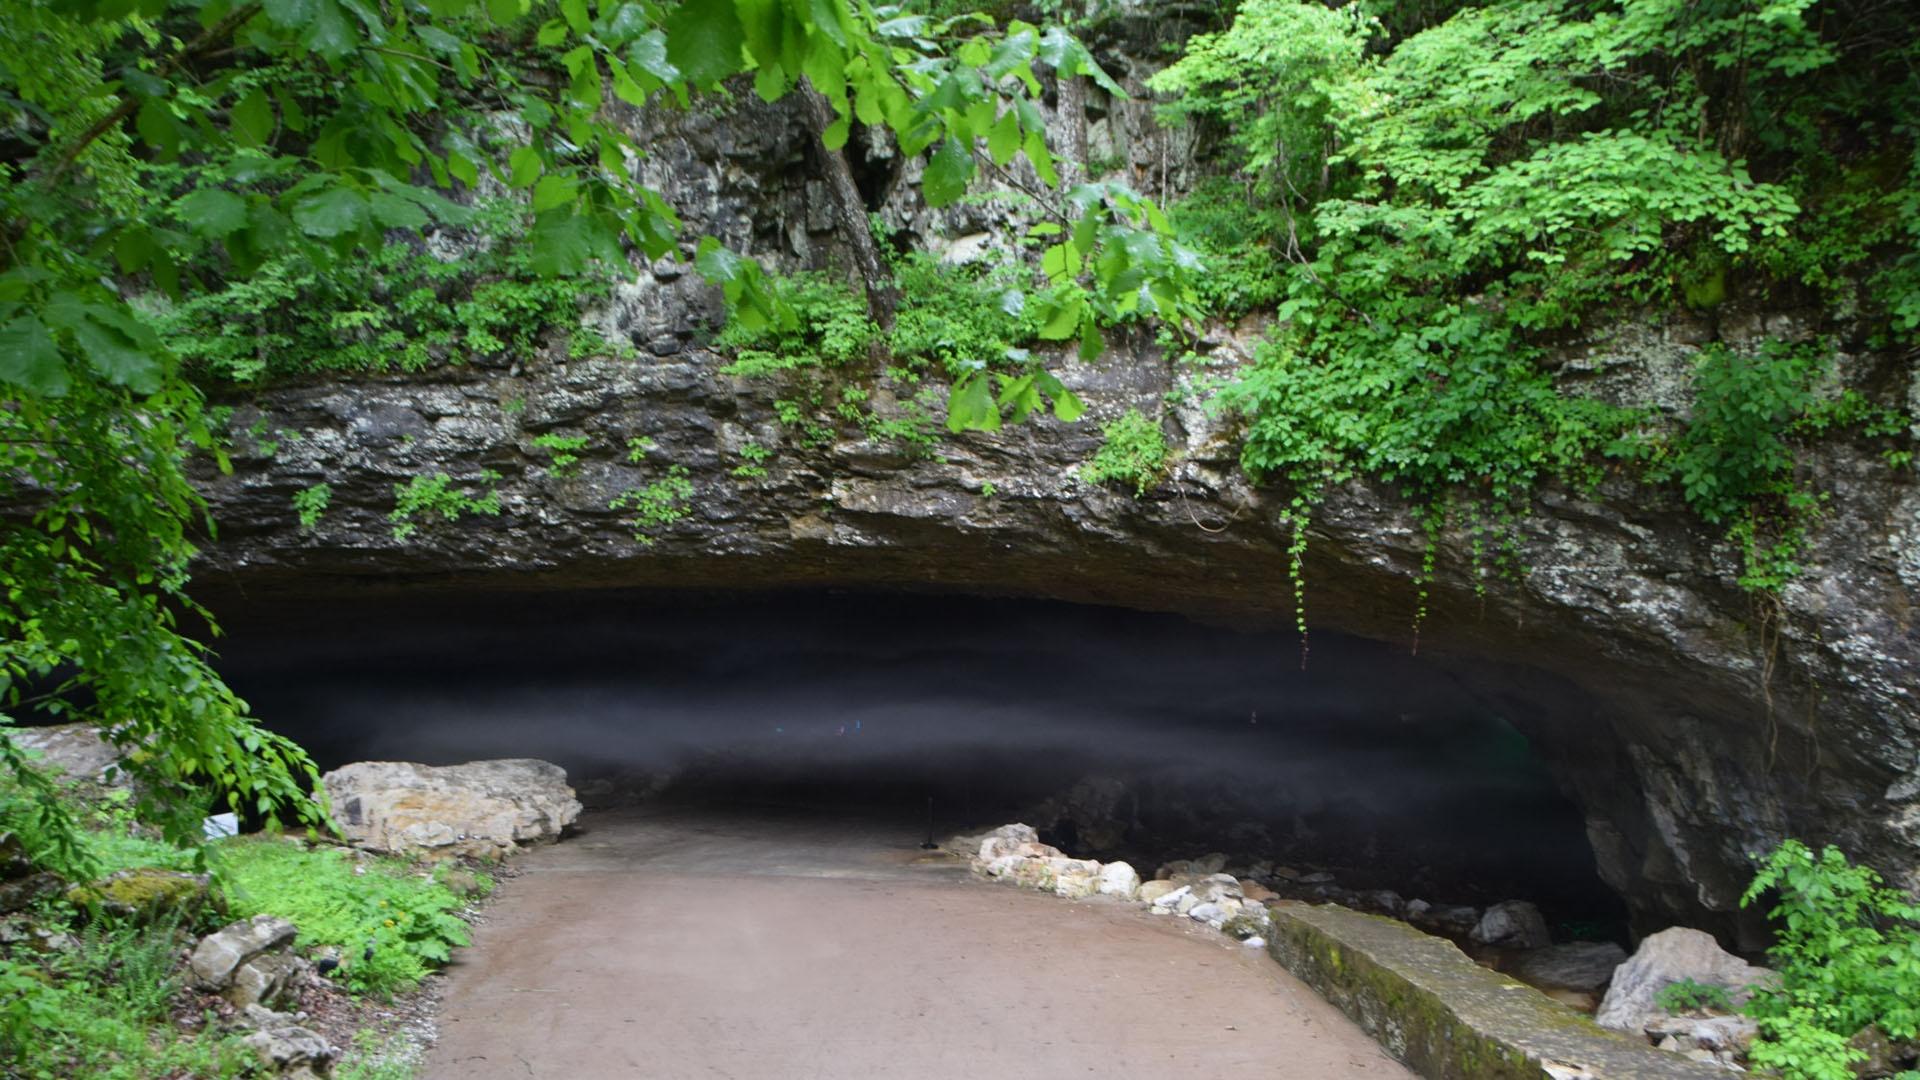 The Caverns entrance in Tennessee.